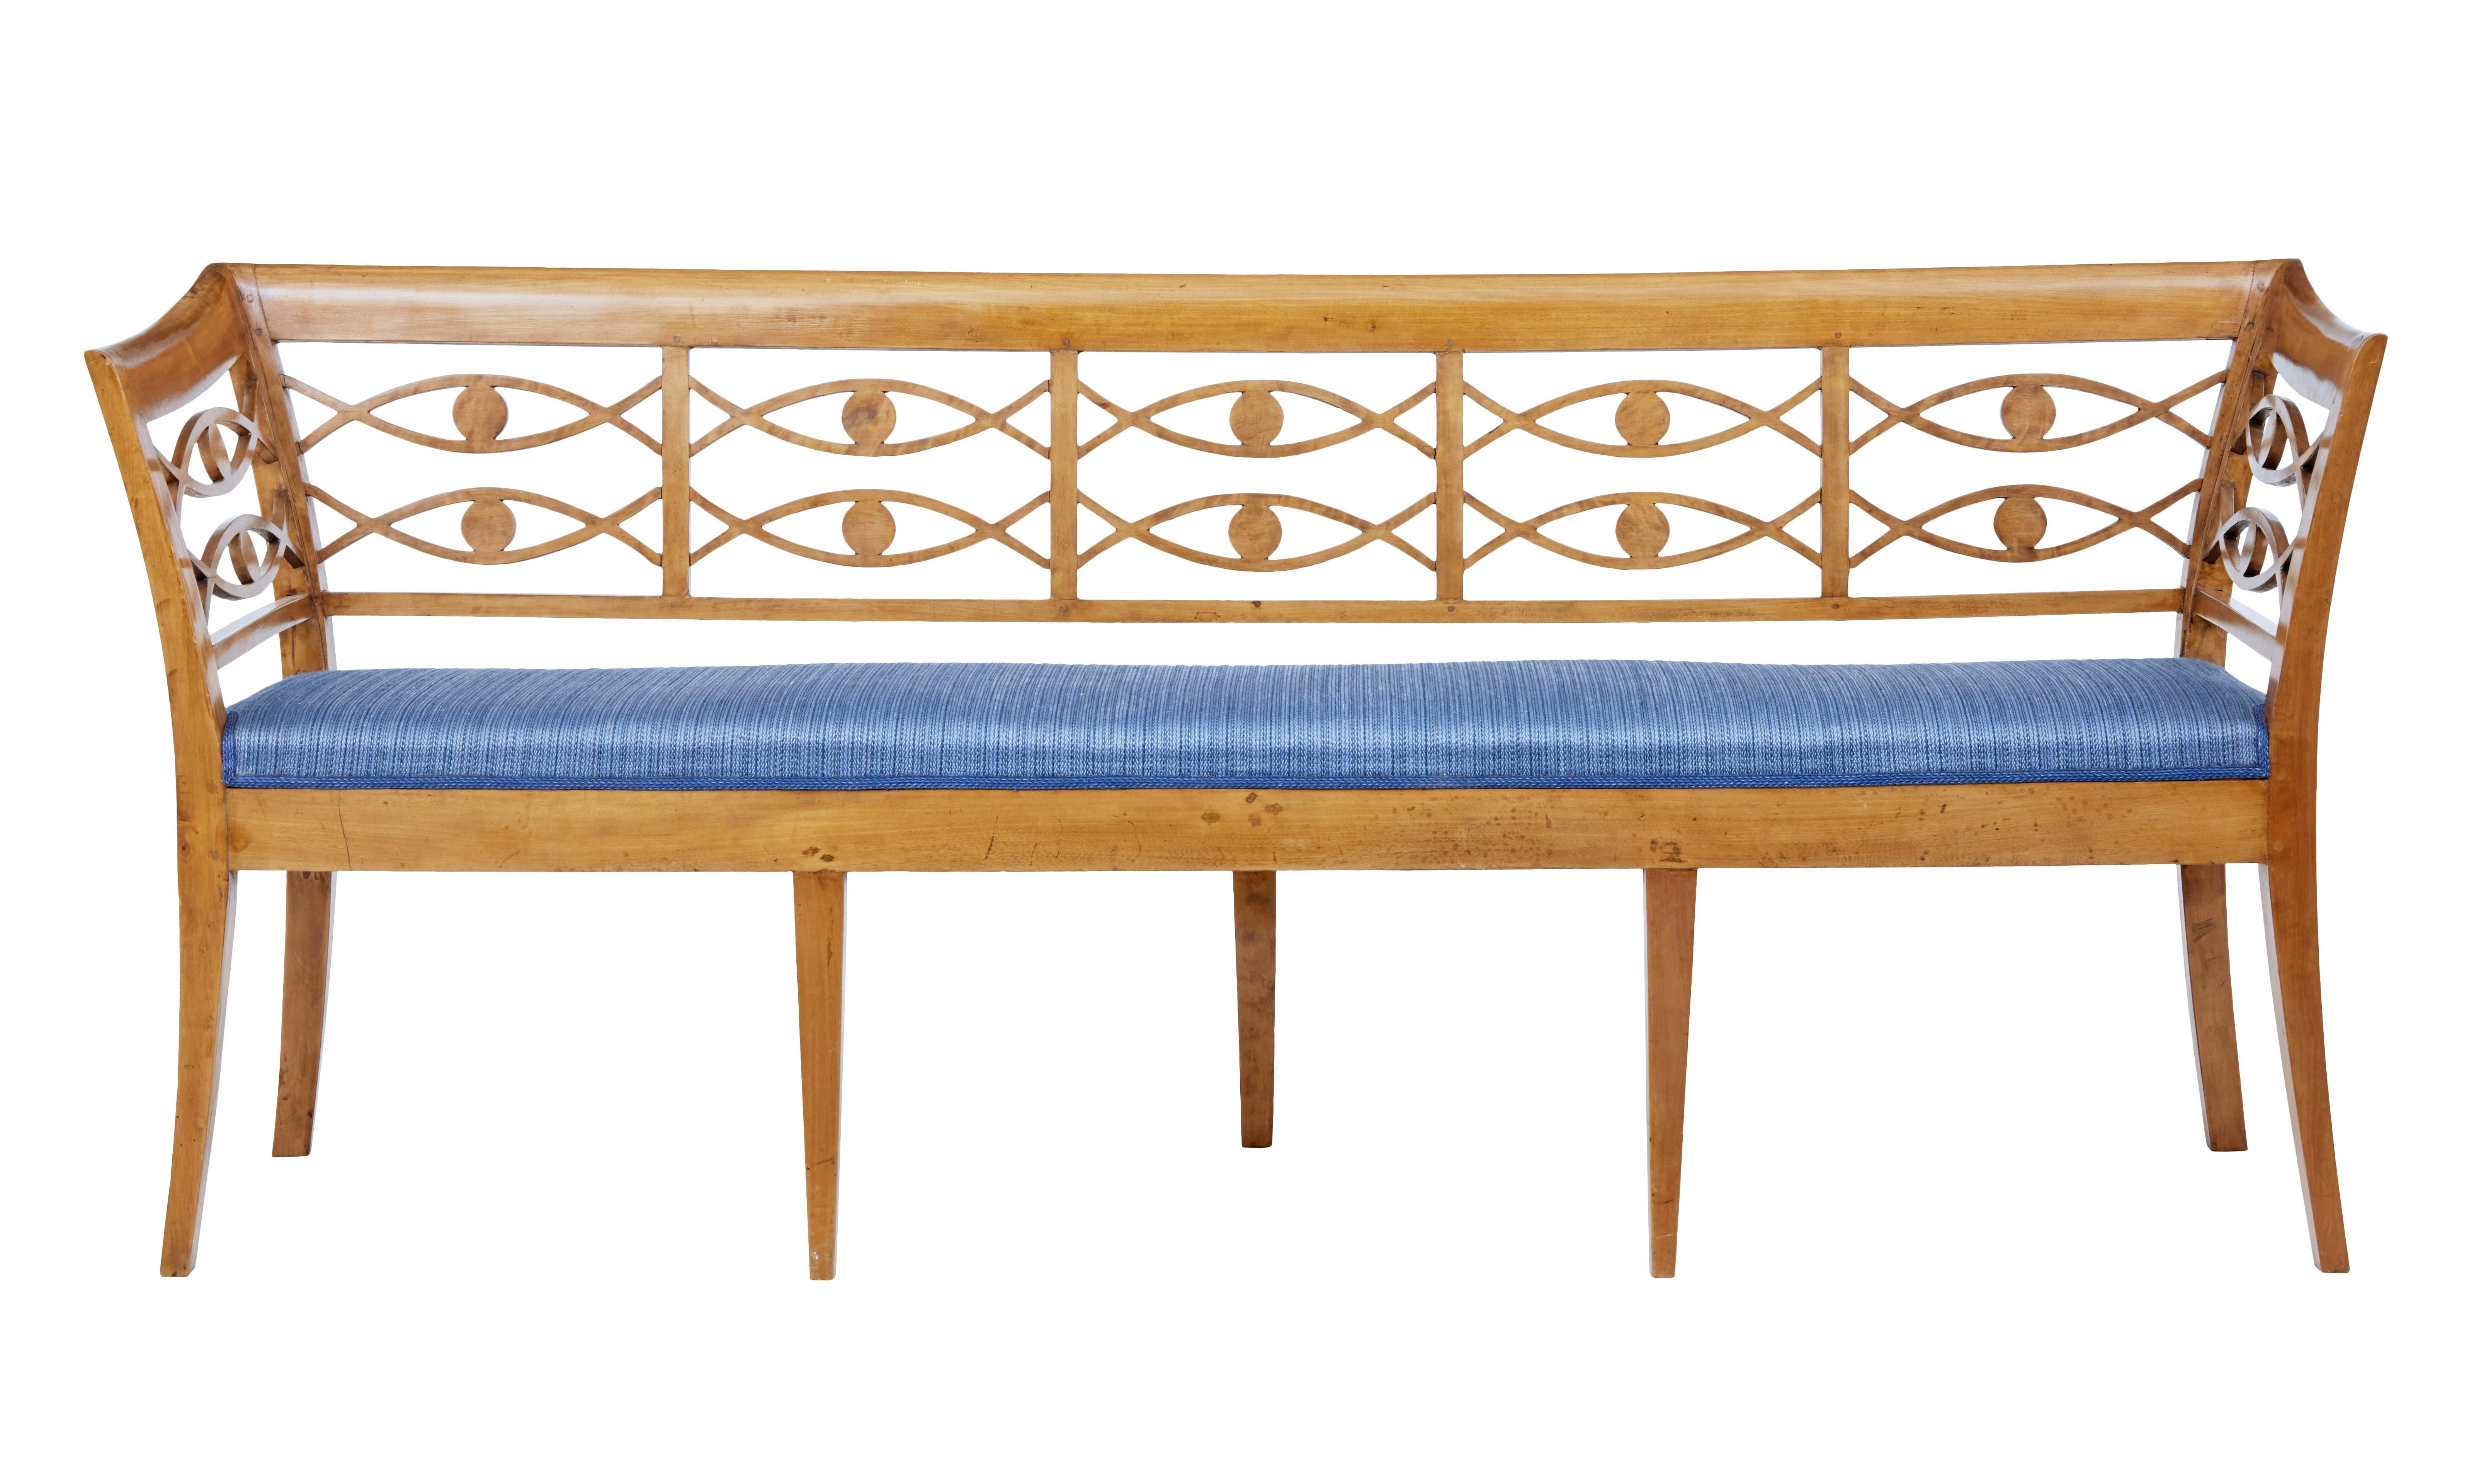 Elegant Swedish birch bench, circa 1890.

Shaped arms and back, with open panel fish like design in the arm and back rests. Rich birch color and patina. Standing on 7 tapered legs.

Re-covered seat in good condition.

Minor marks to